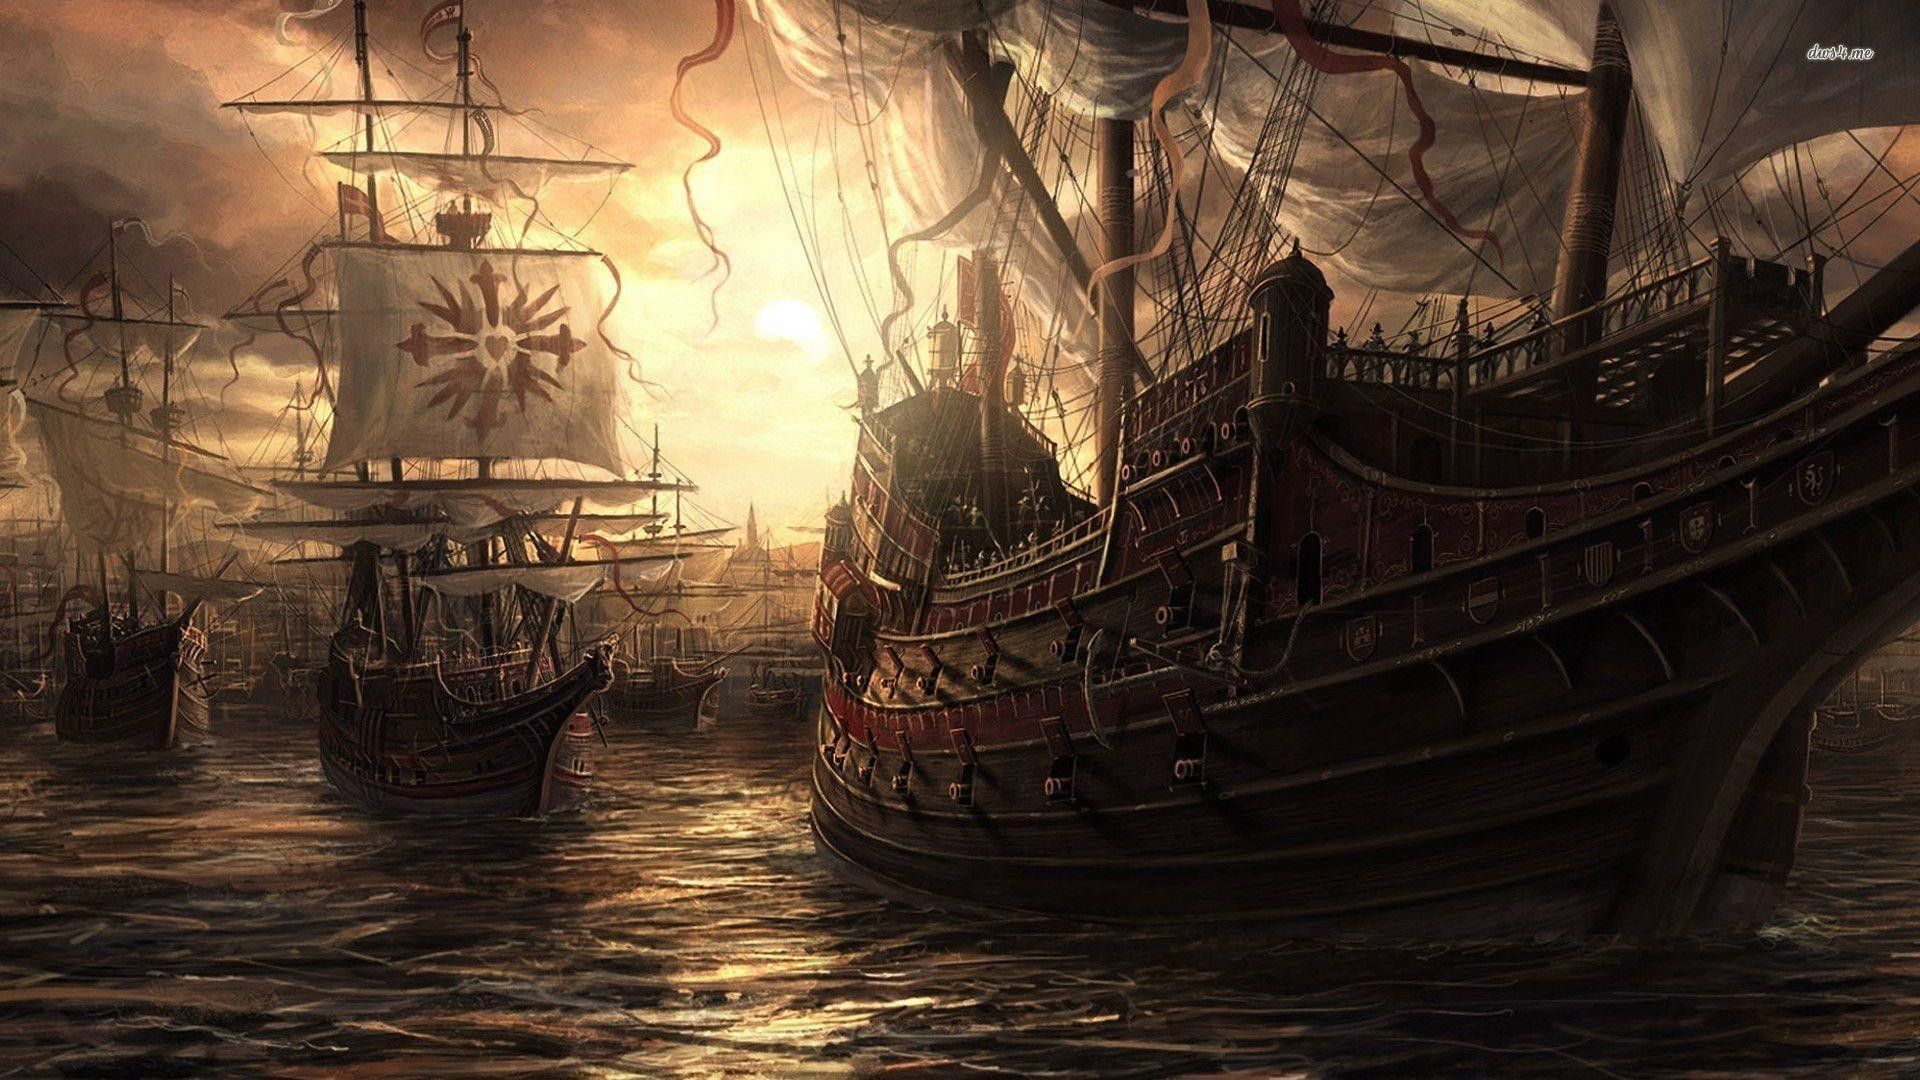 The battle of the ships wallpaper - 1193099 - Pirate